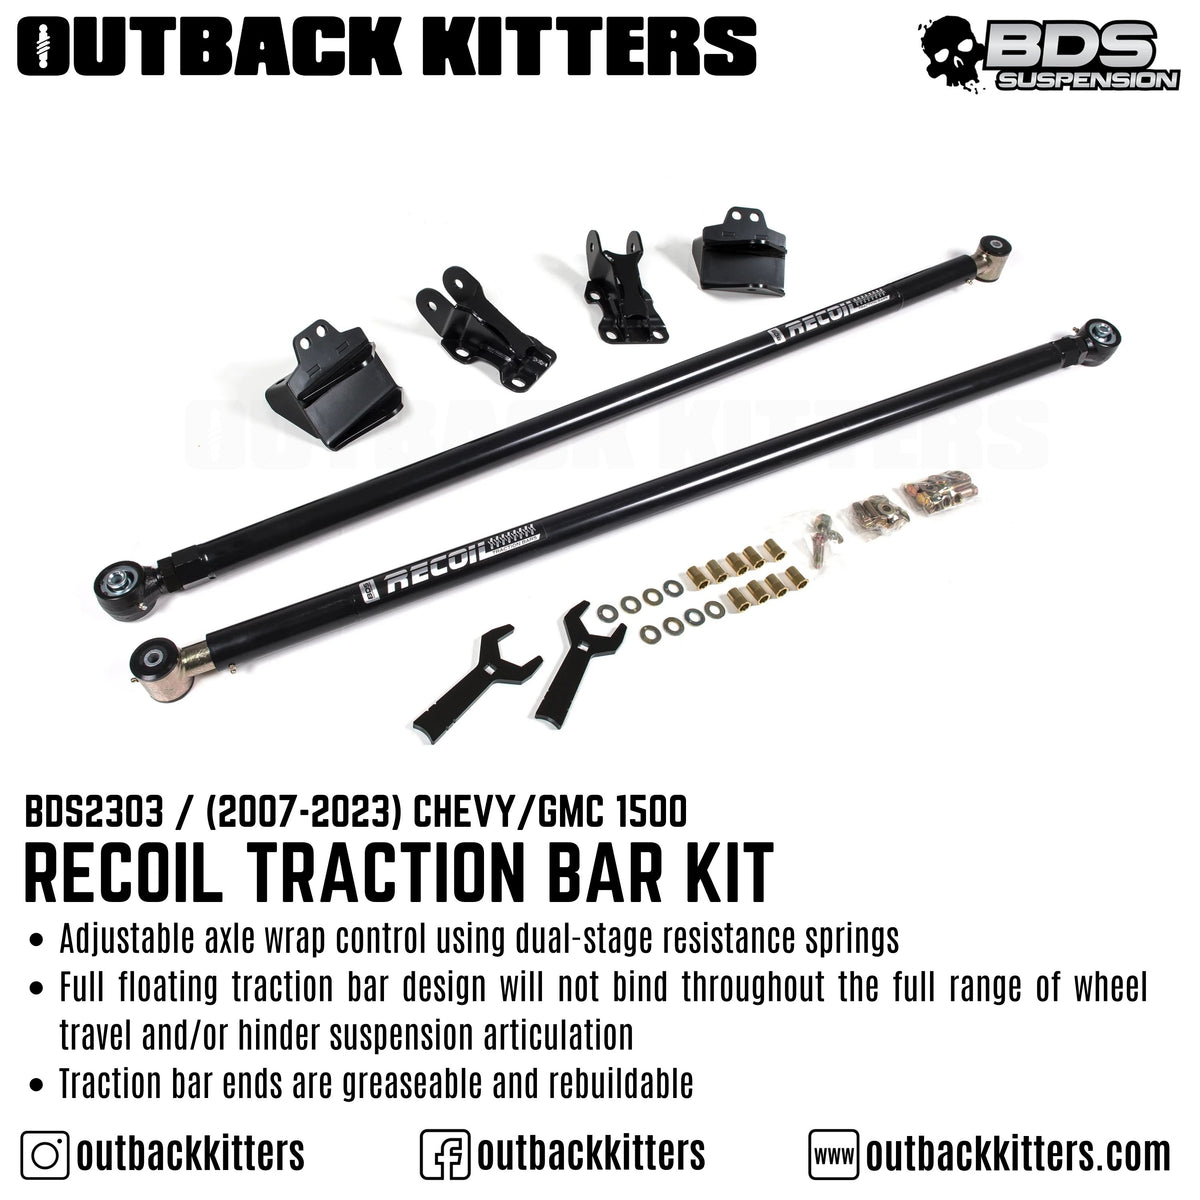 2007-2023 Chevy/GMC 1500 Recoil Traction Bar Kit - Outback Kitters